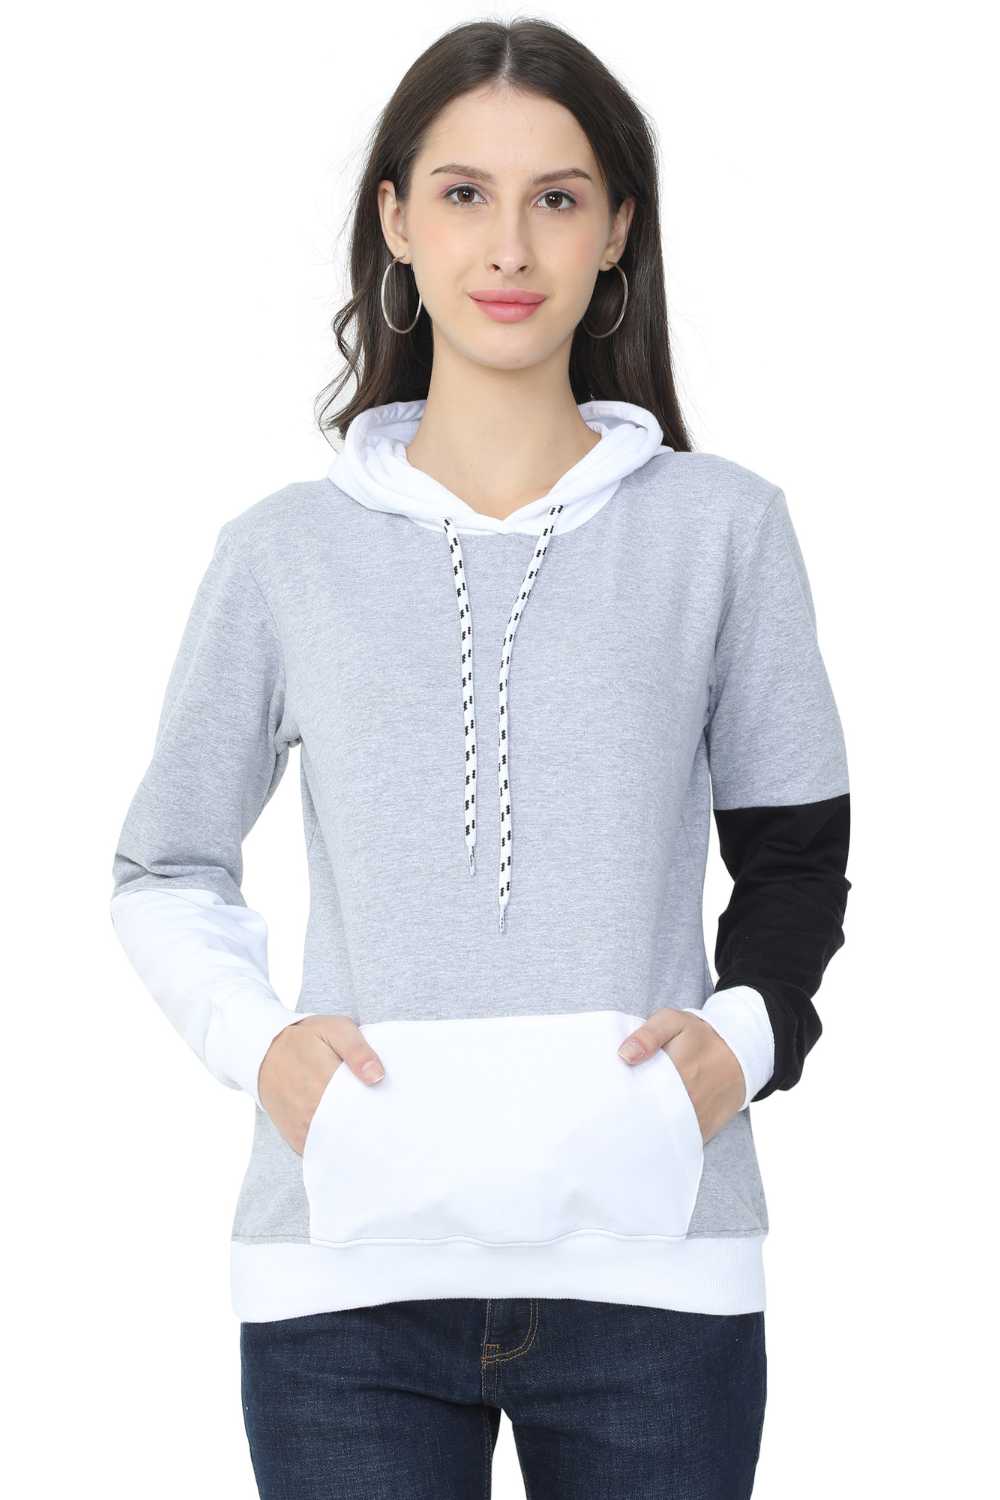 HOODIE for Women In Grey, Black and White Mixed | sandgrouse